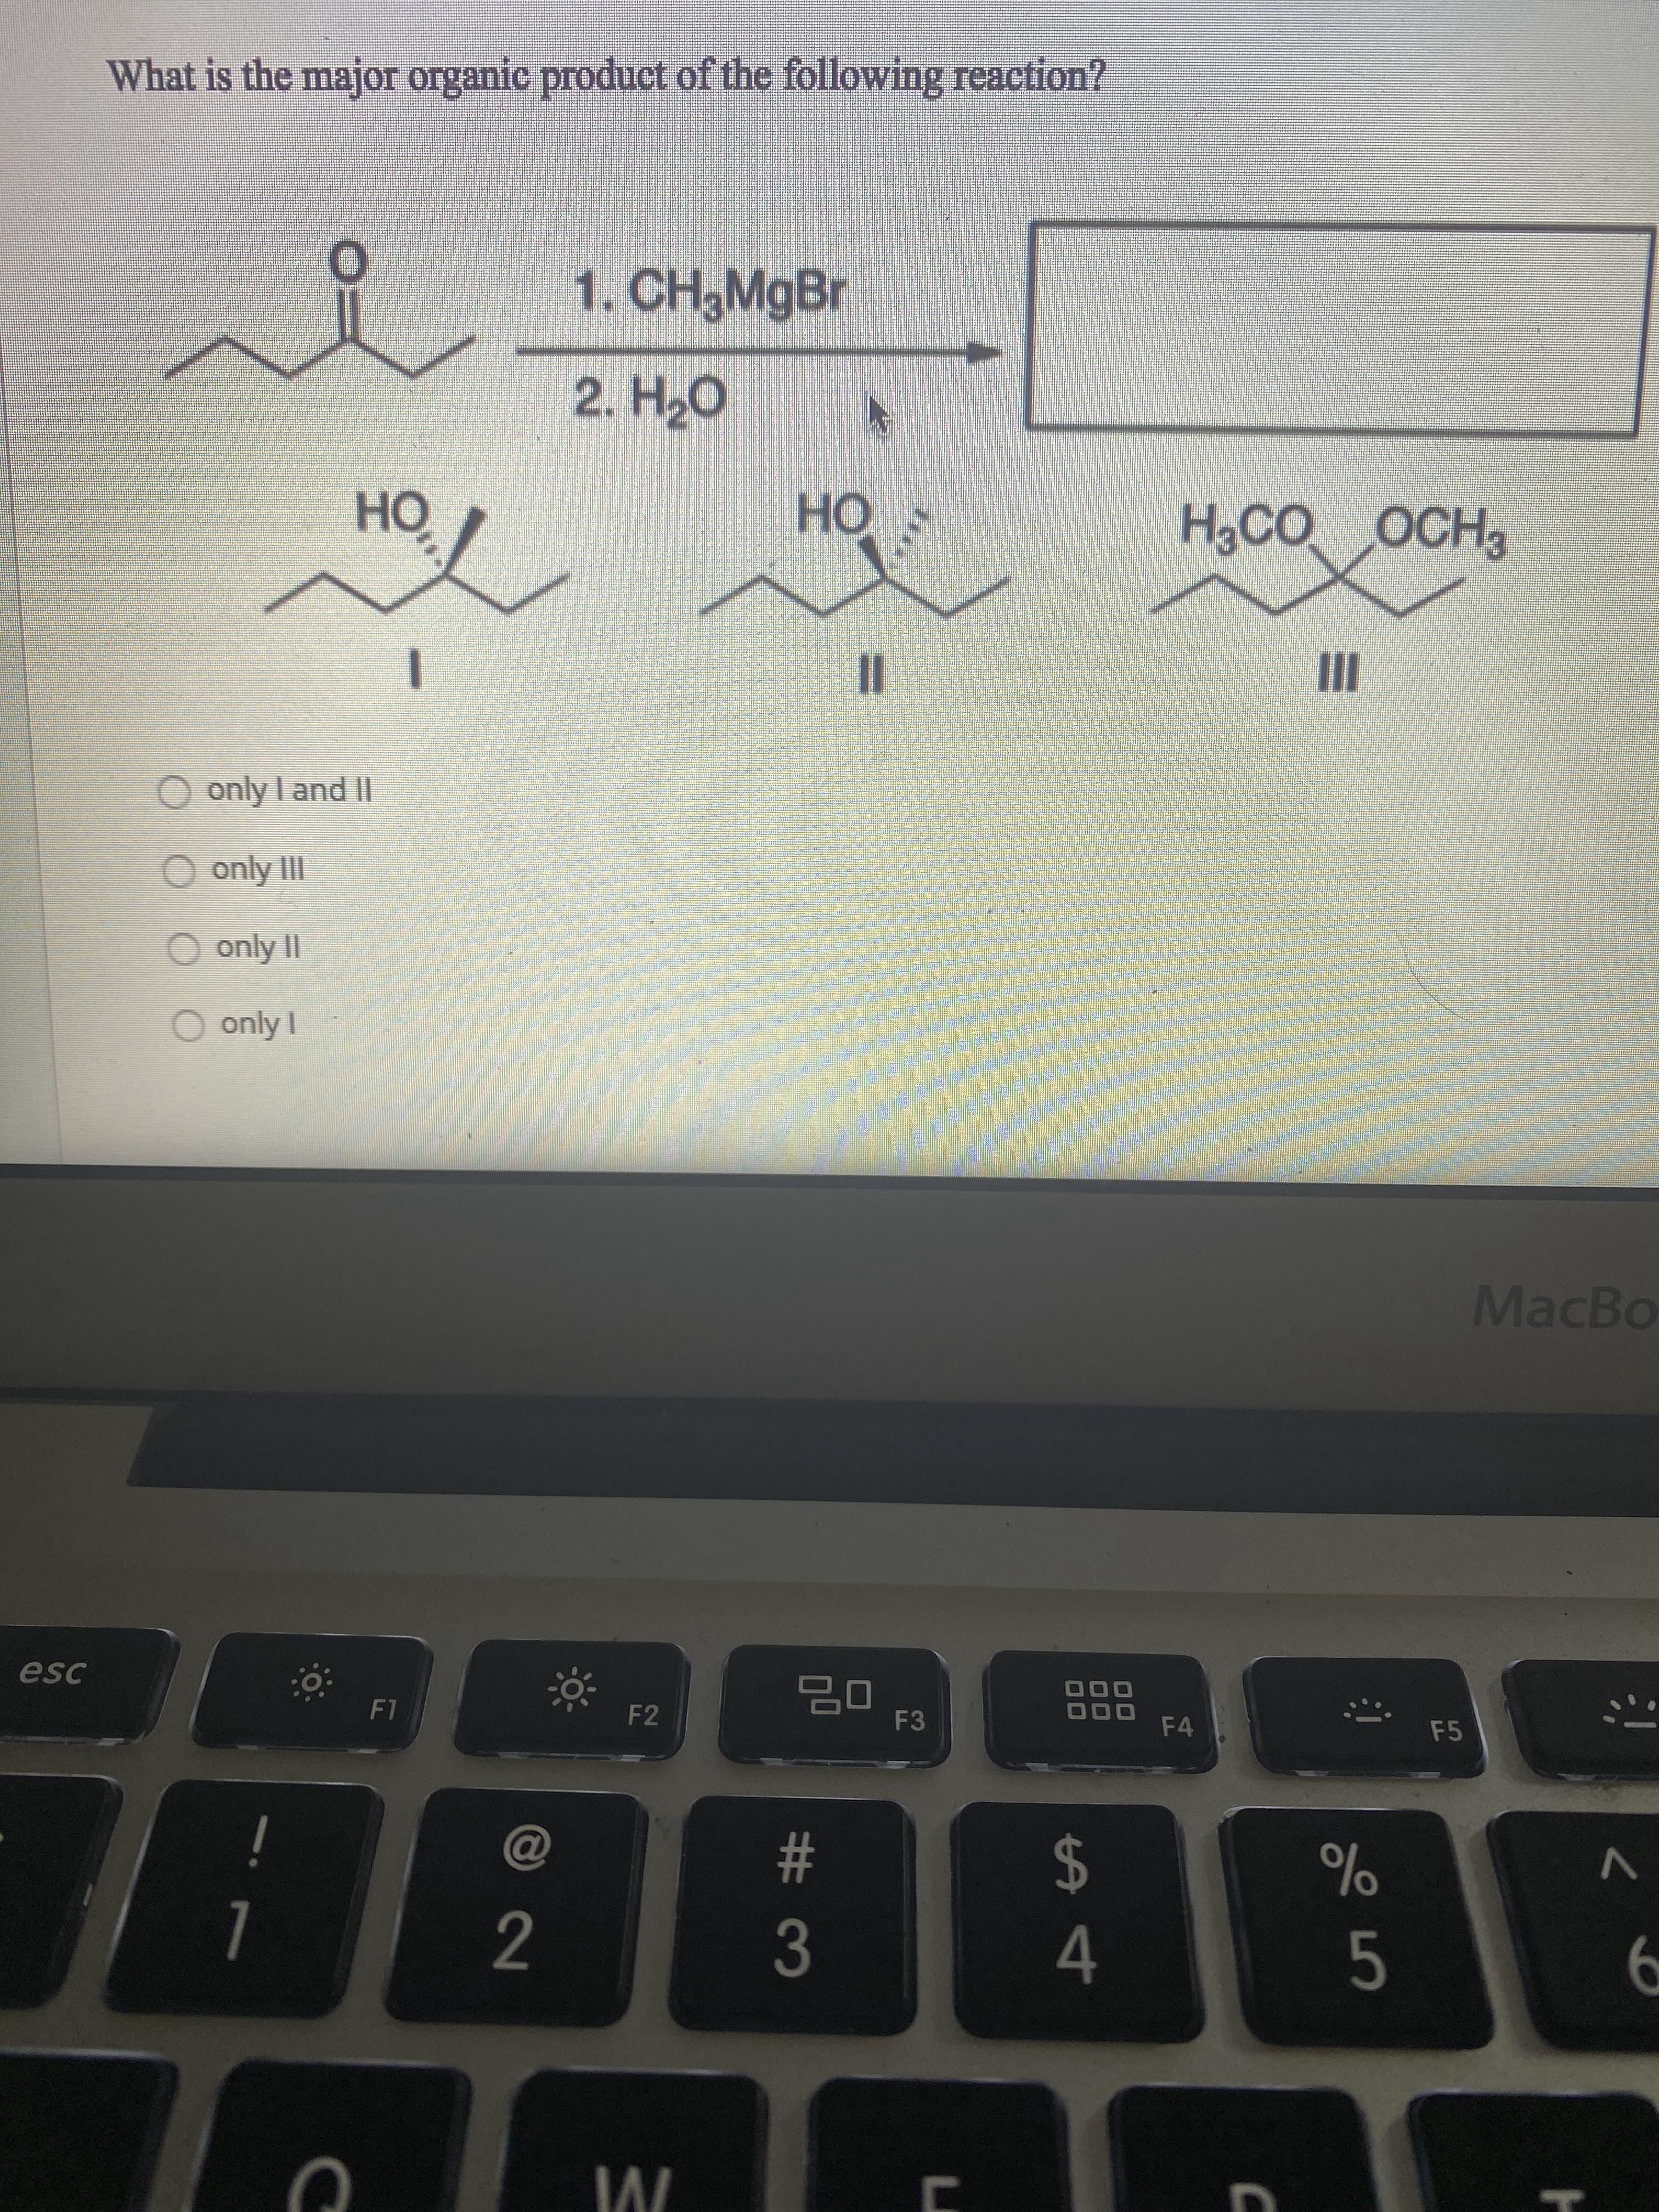 What is the major organic product of the following reaction?
